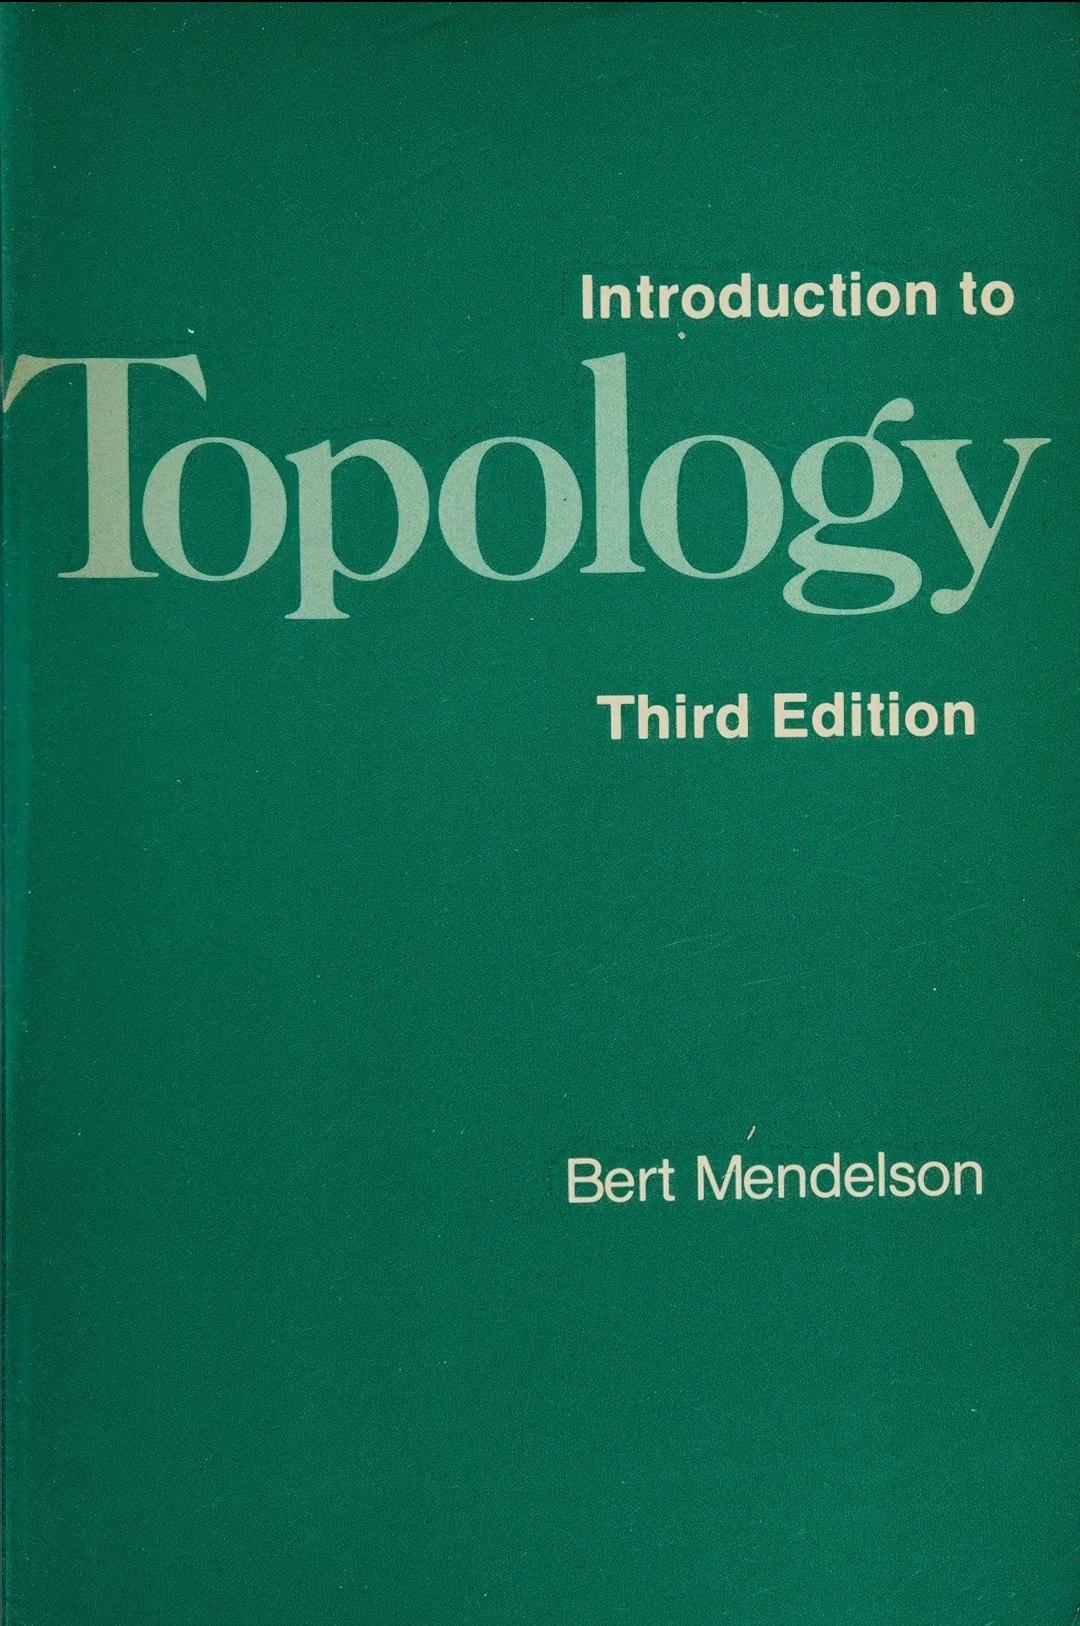 Thumbnail of book Introduction to Topology by Bert Mendelson, 3rd Edition cover